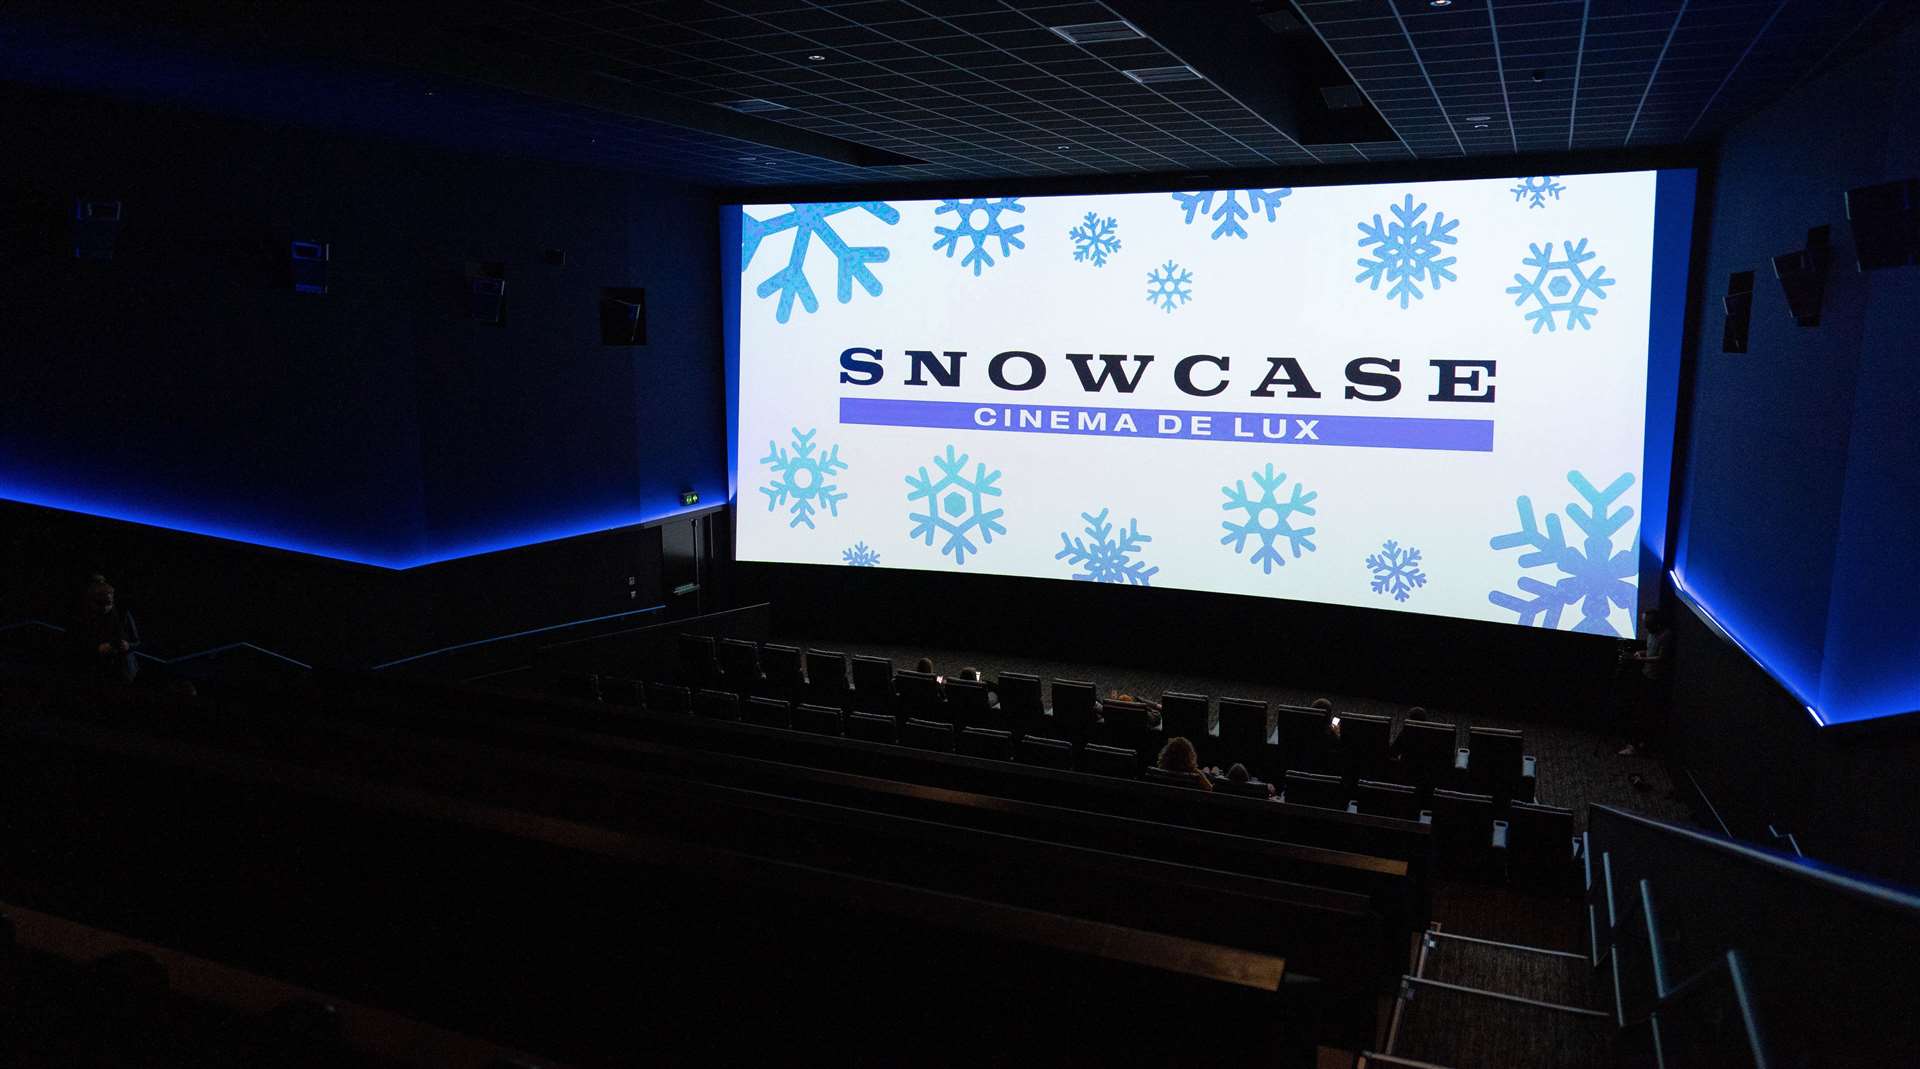 Showcase Cinema, Bluewater became Snowcase for the day